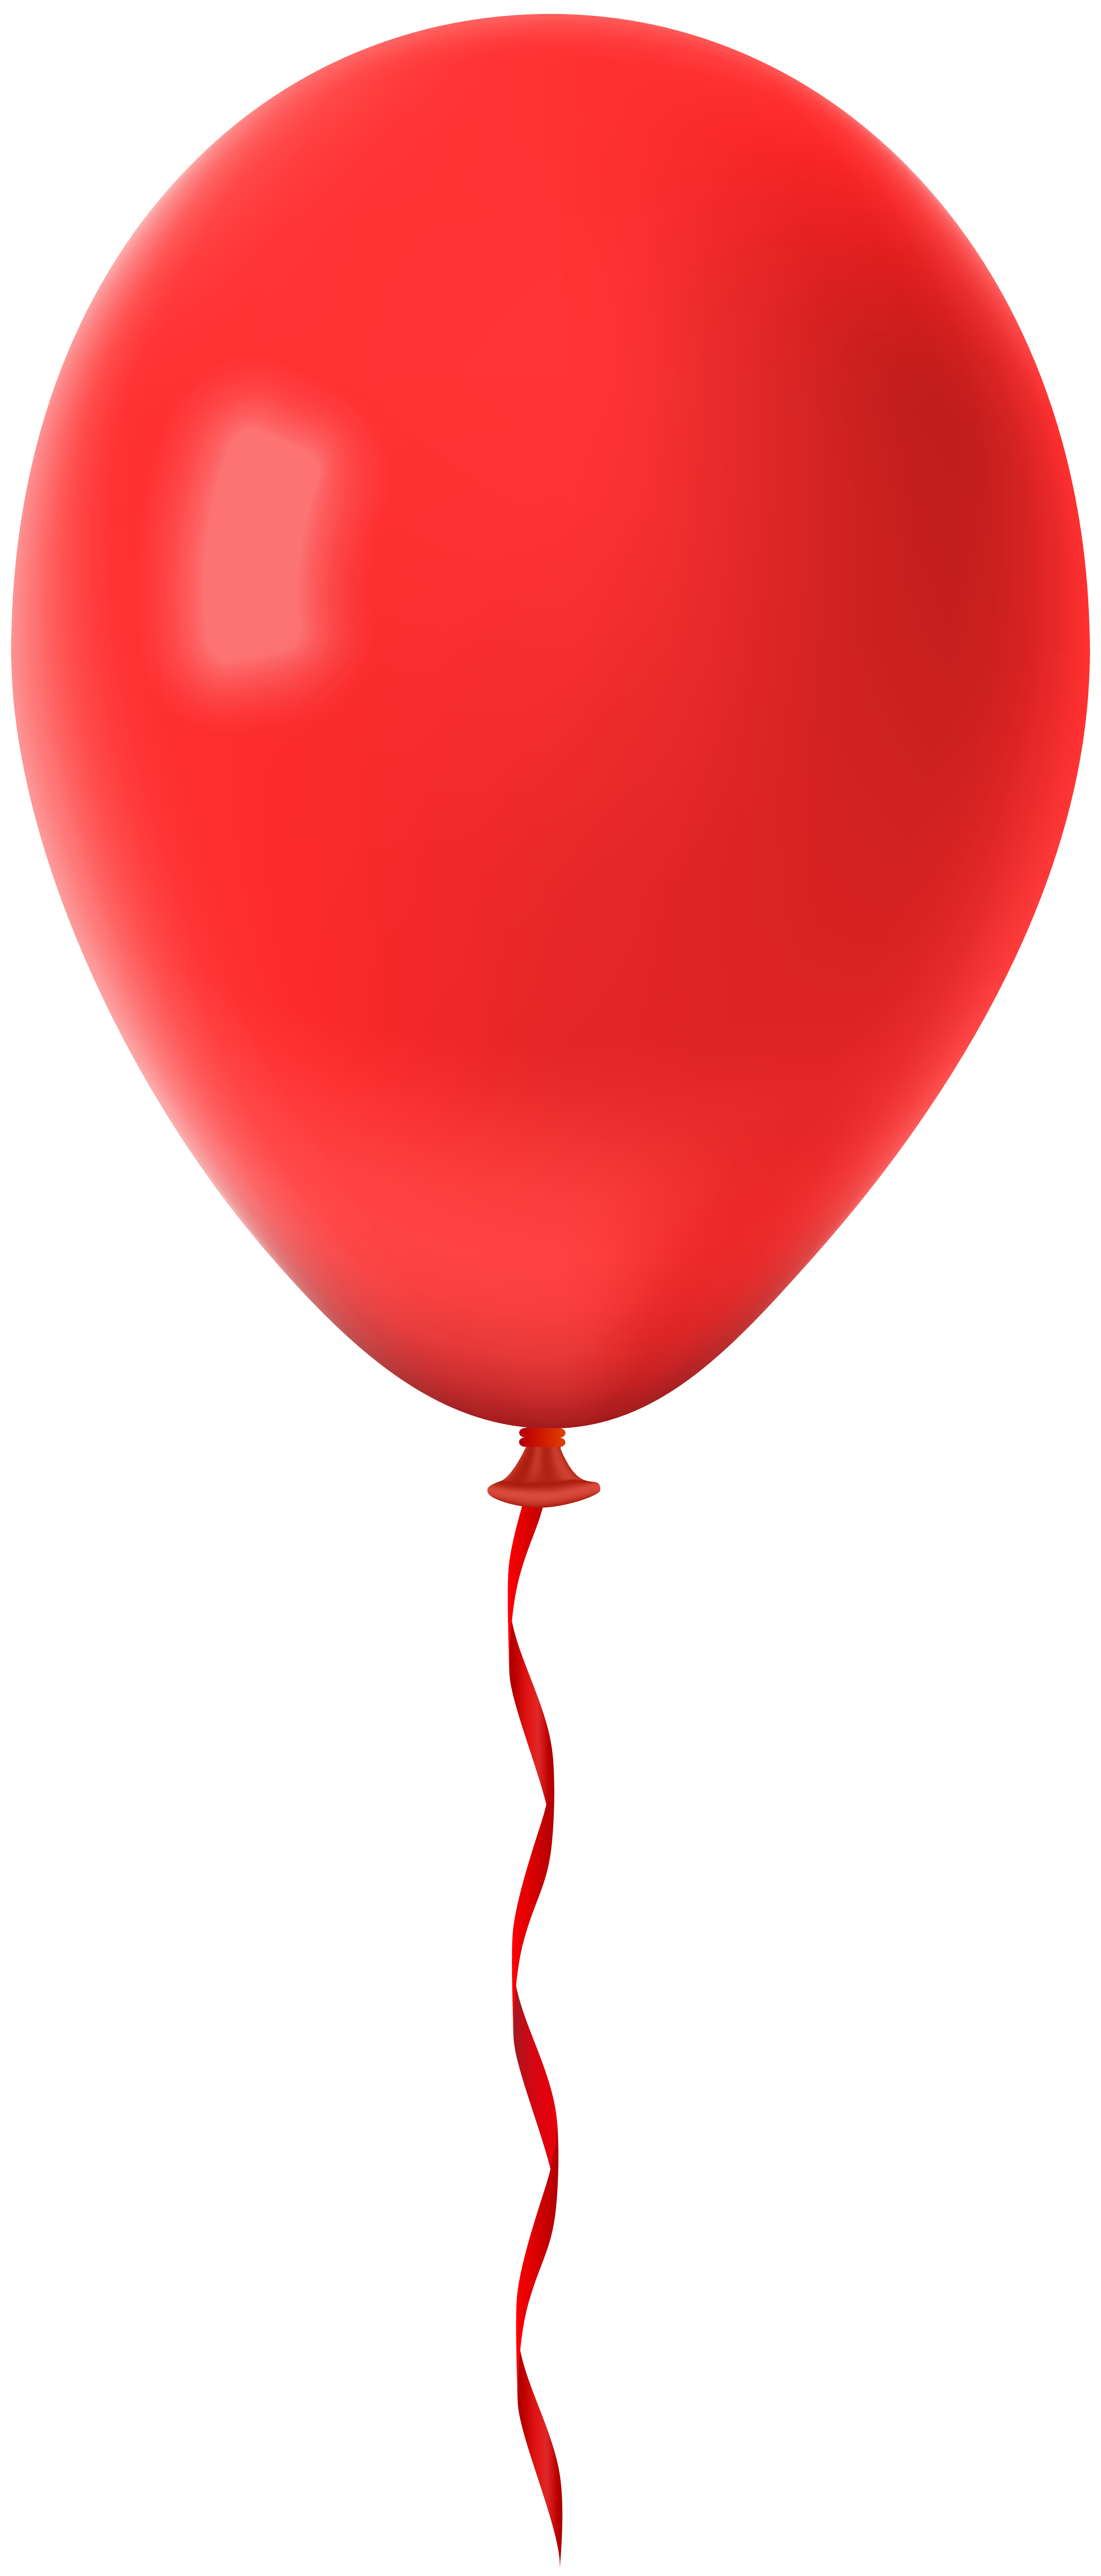 Red Balloon Transparent PNG Clip Art Image